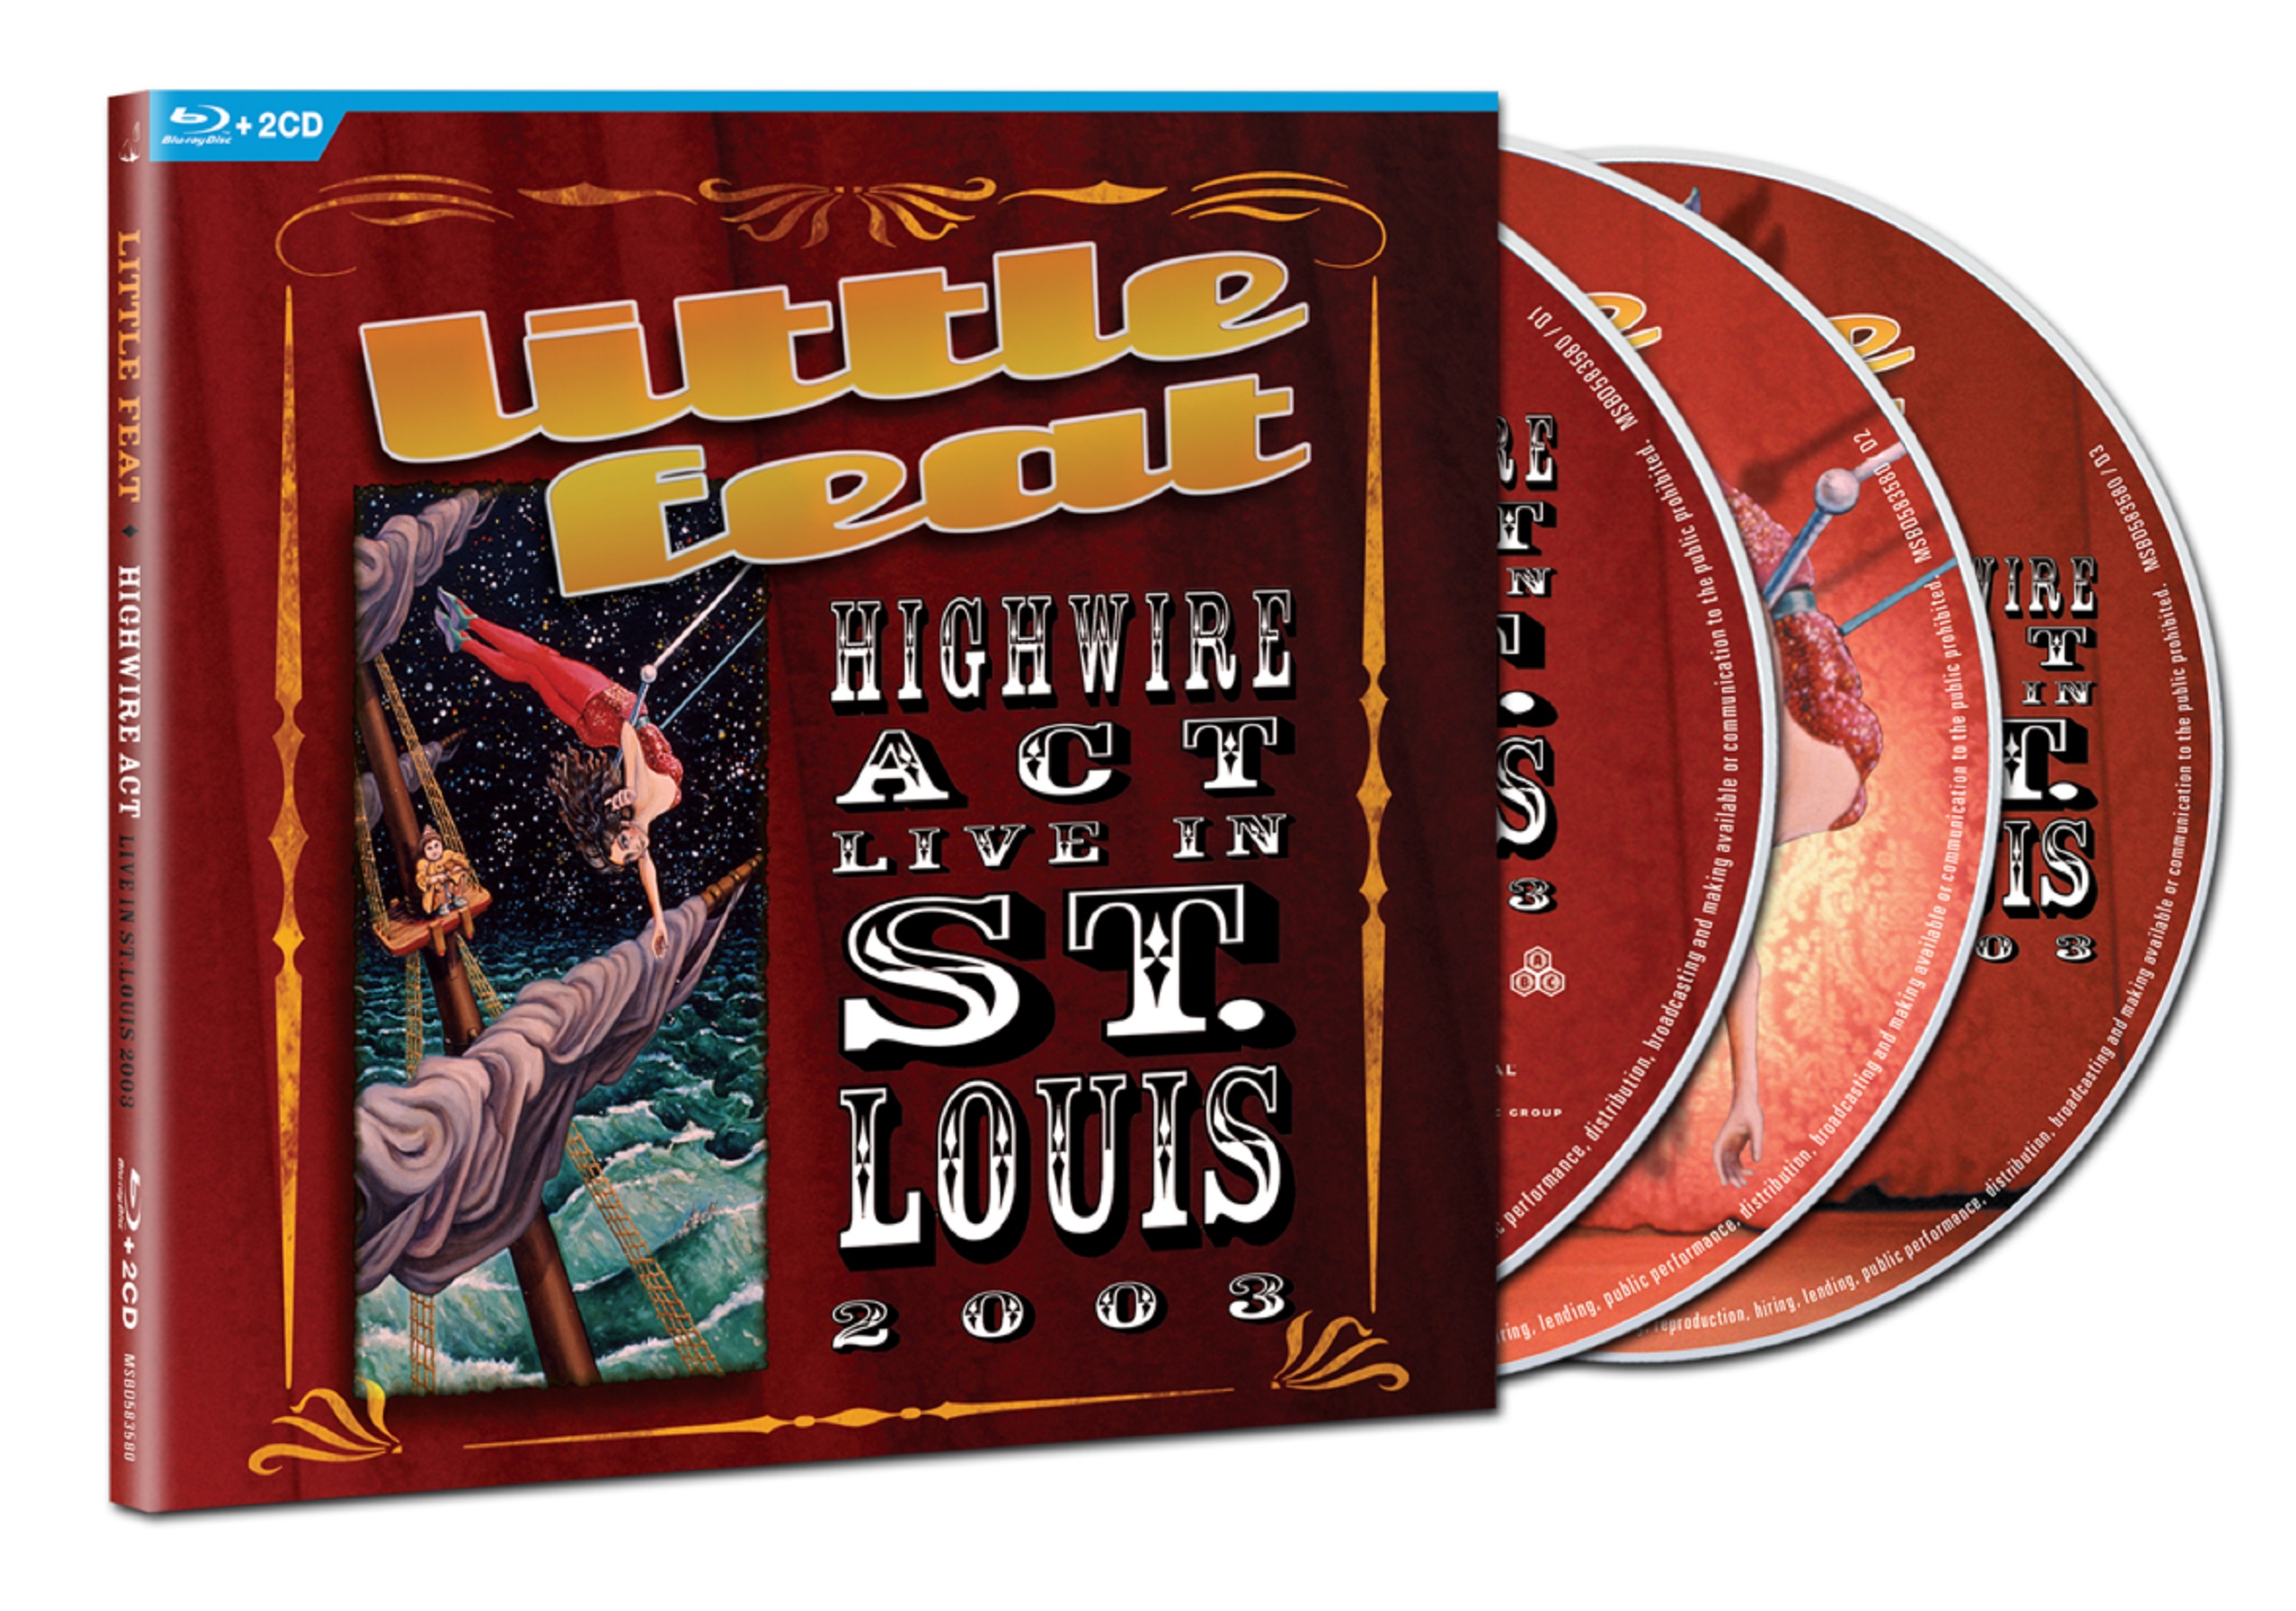 LITTLE FEAT HIGHWIRE ACT IN ST. LOUIS OUT ON BLU-RAY & DIGITAL NOVEMBER 3, 2023